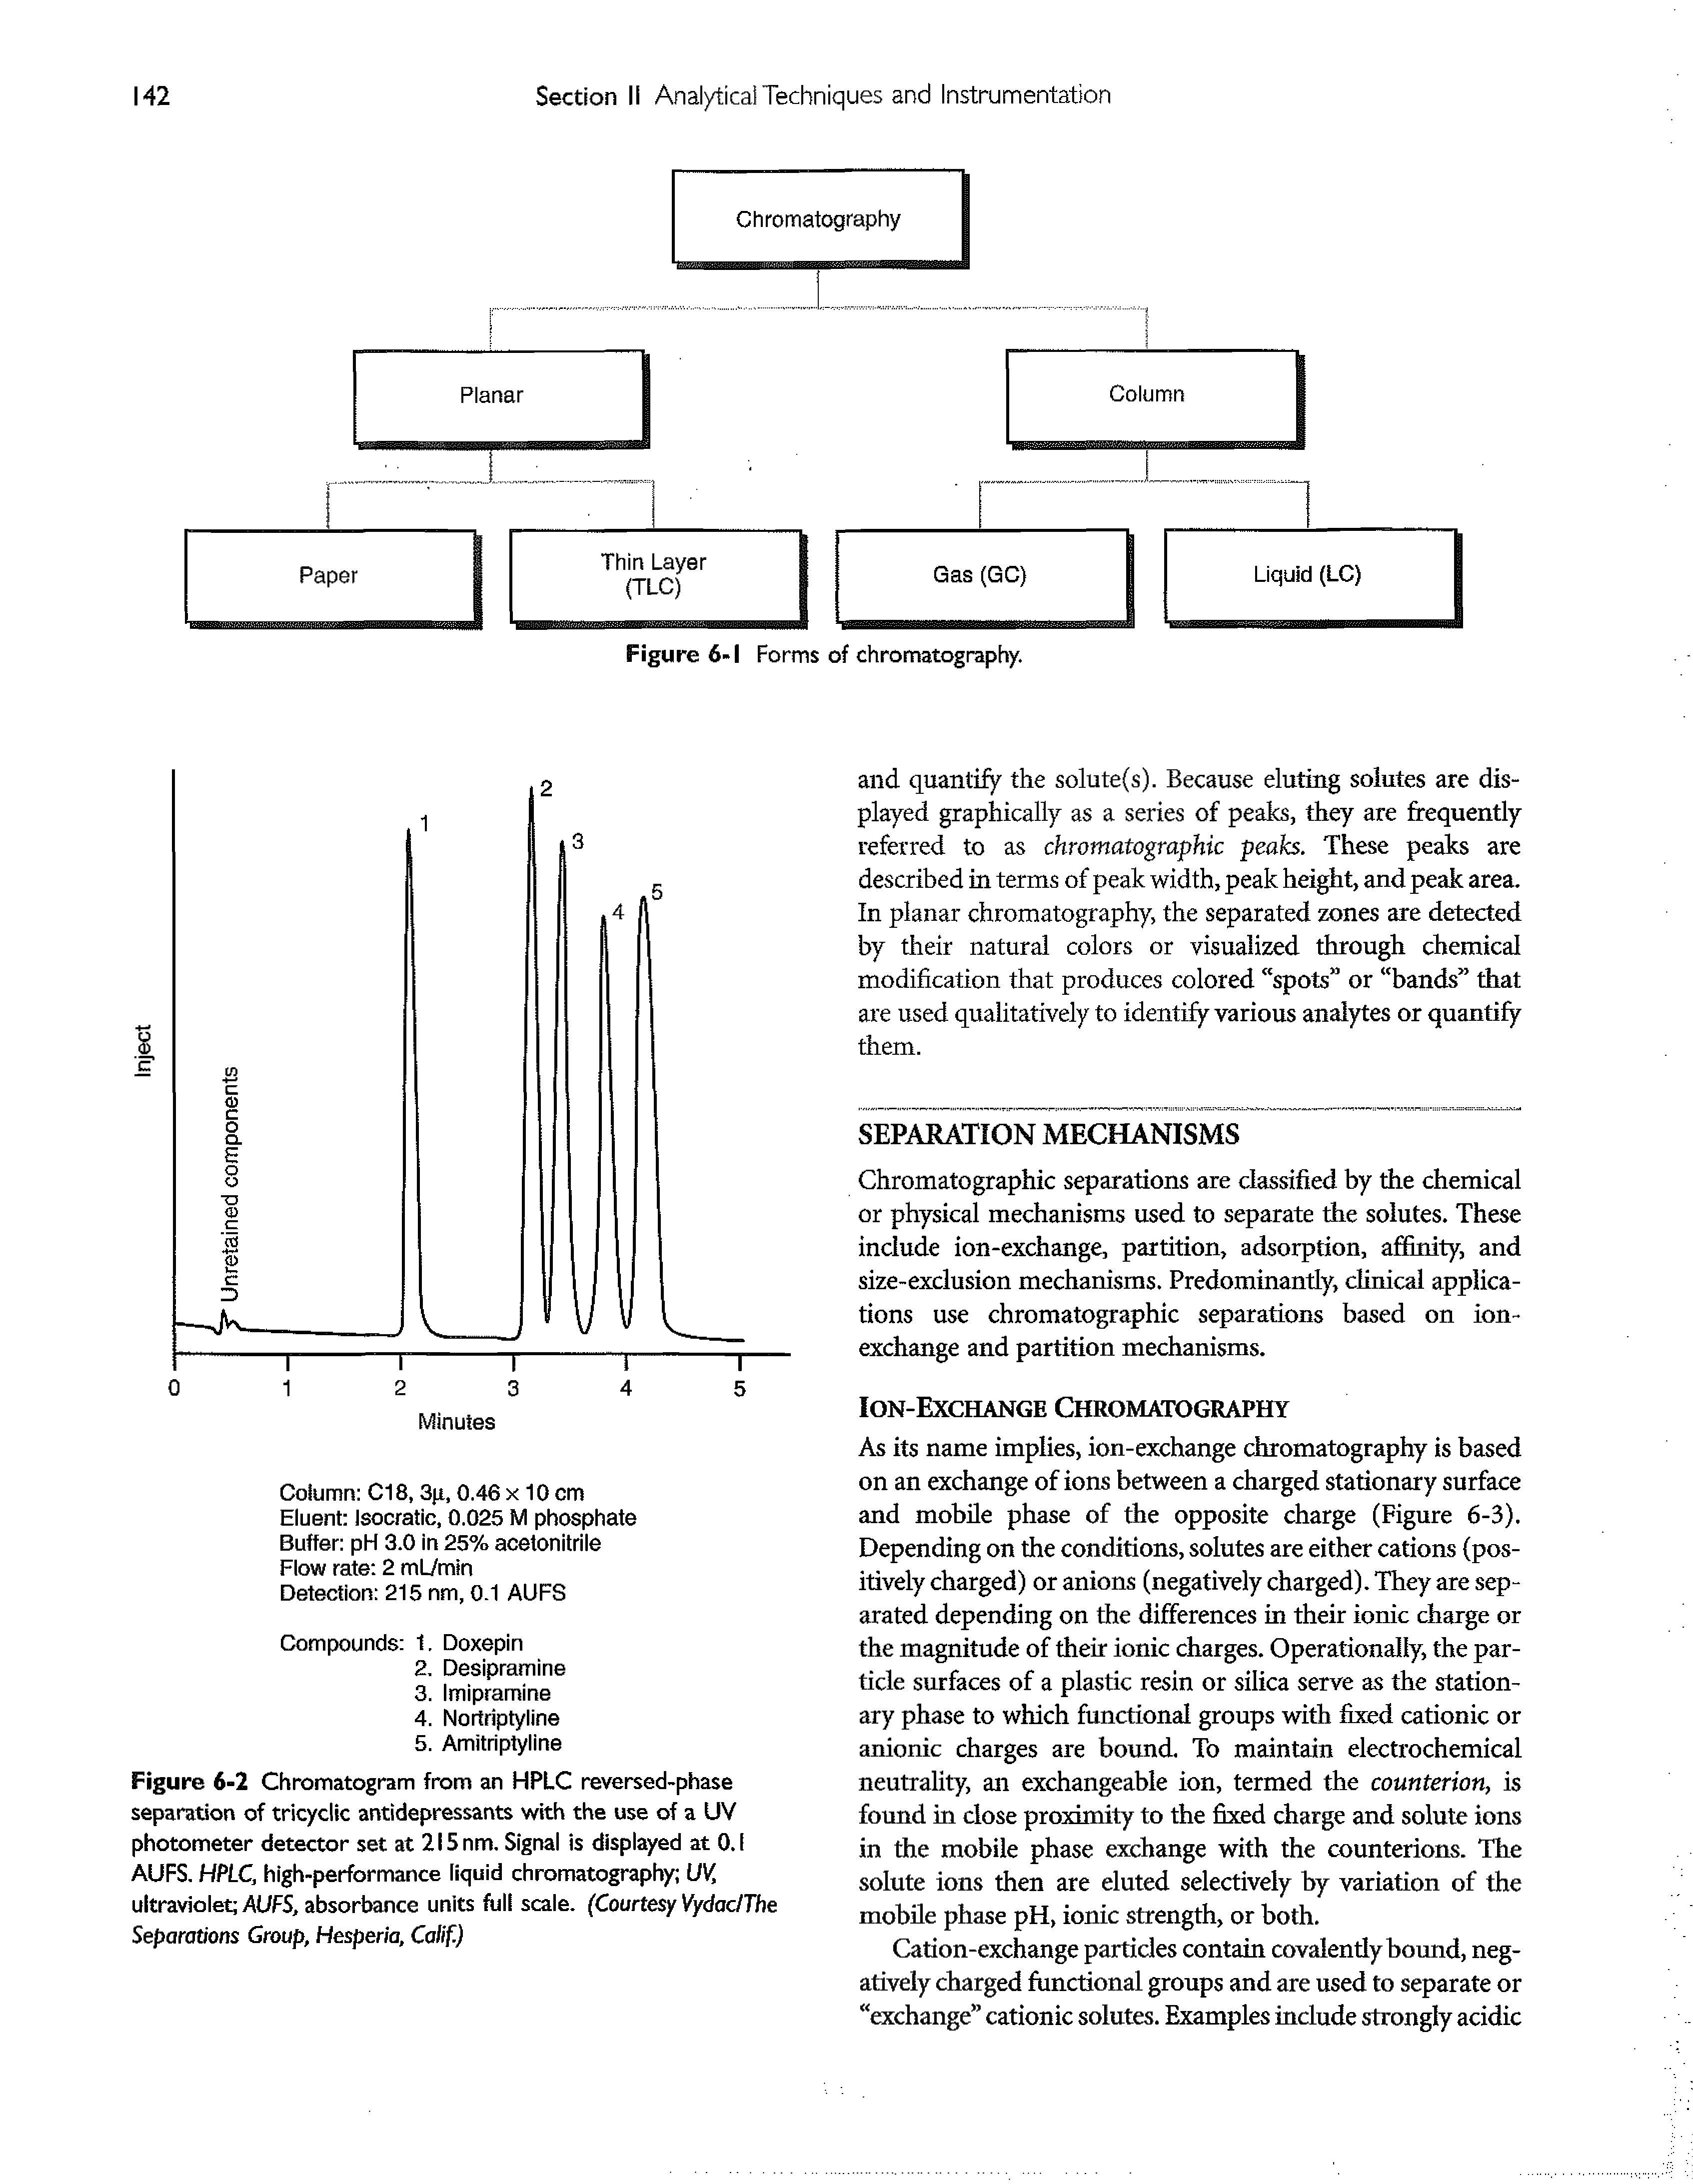 Figure 6-2 Chromatogram from an HPLC reversed-phase separation of tricyclic antidepressants with the use of a UV photometer detector set at 2l5nm. Signal is displayed at 0.1 AUFS, HPLC high-performance liquid chromatography UV, ultraviolet AUFS, absorbance units full scale. (Courtesy Vydac/The Separations Group, Hesperia, Calif.)...